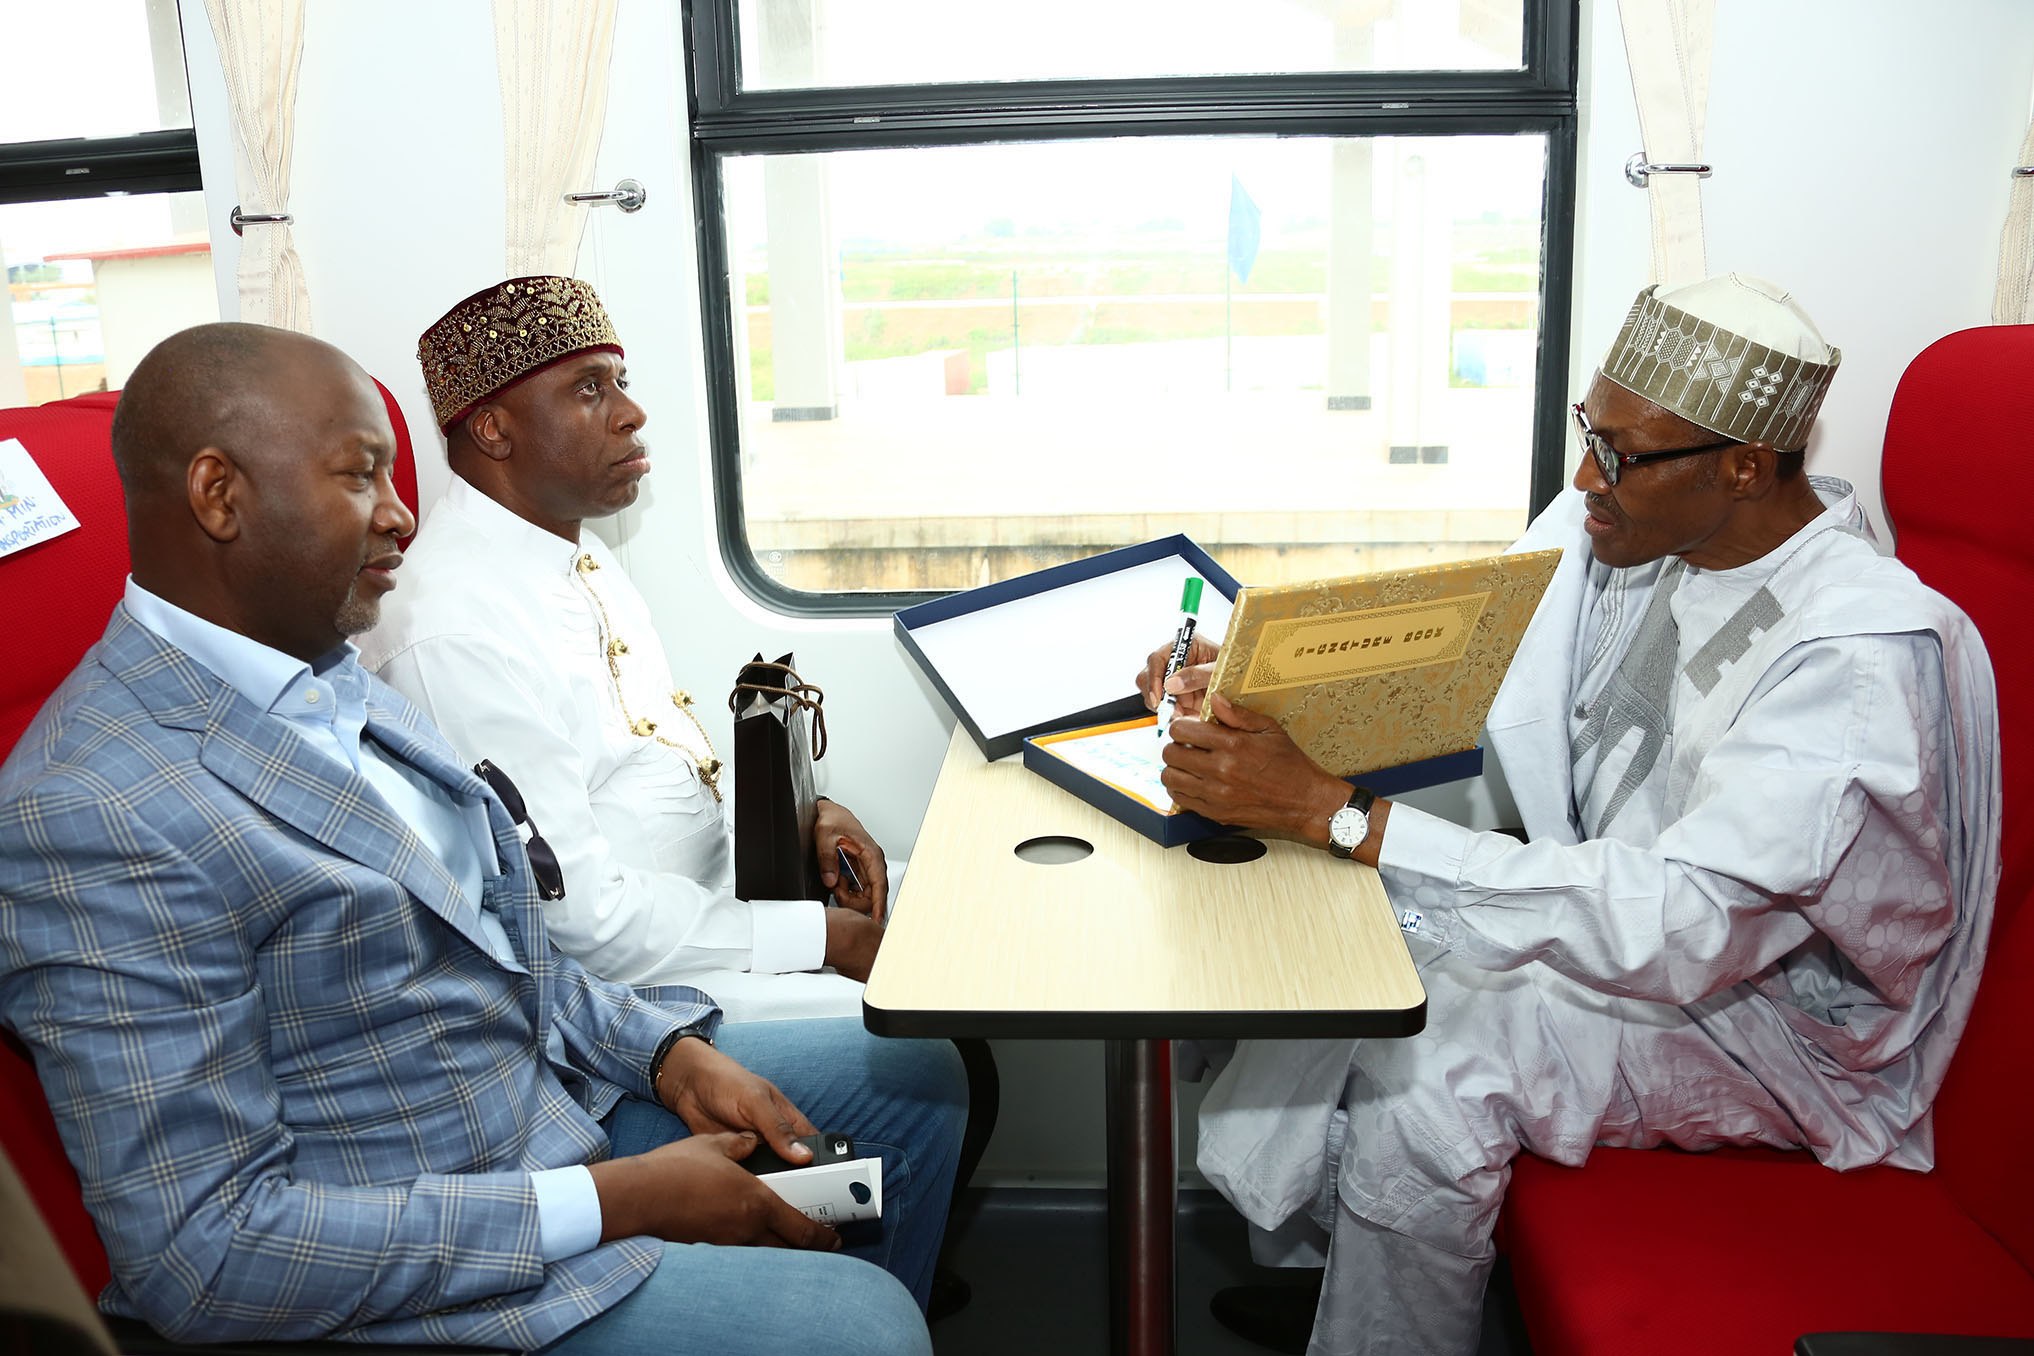 President Muhammadu Buhari takes a train ride with the Minister of Transport, Rotimi Amaechi and the Minister of state for Aviation, Hadi Sarika. [DailyPost]